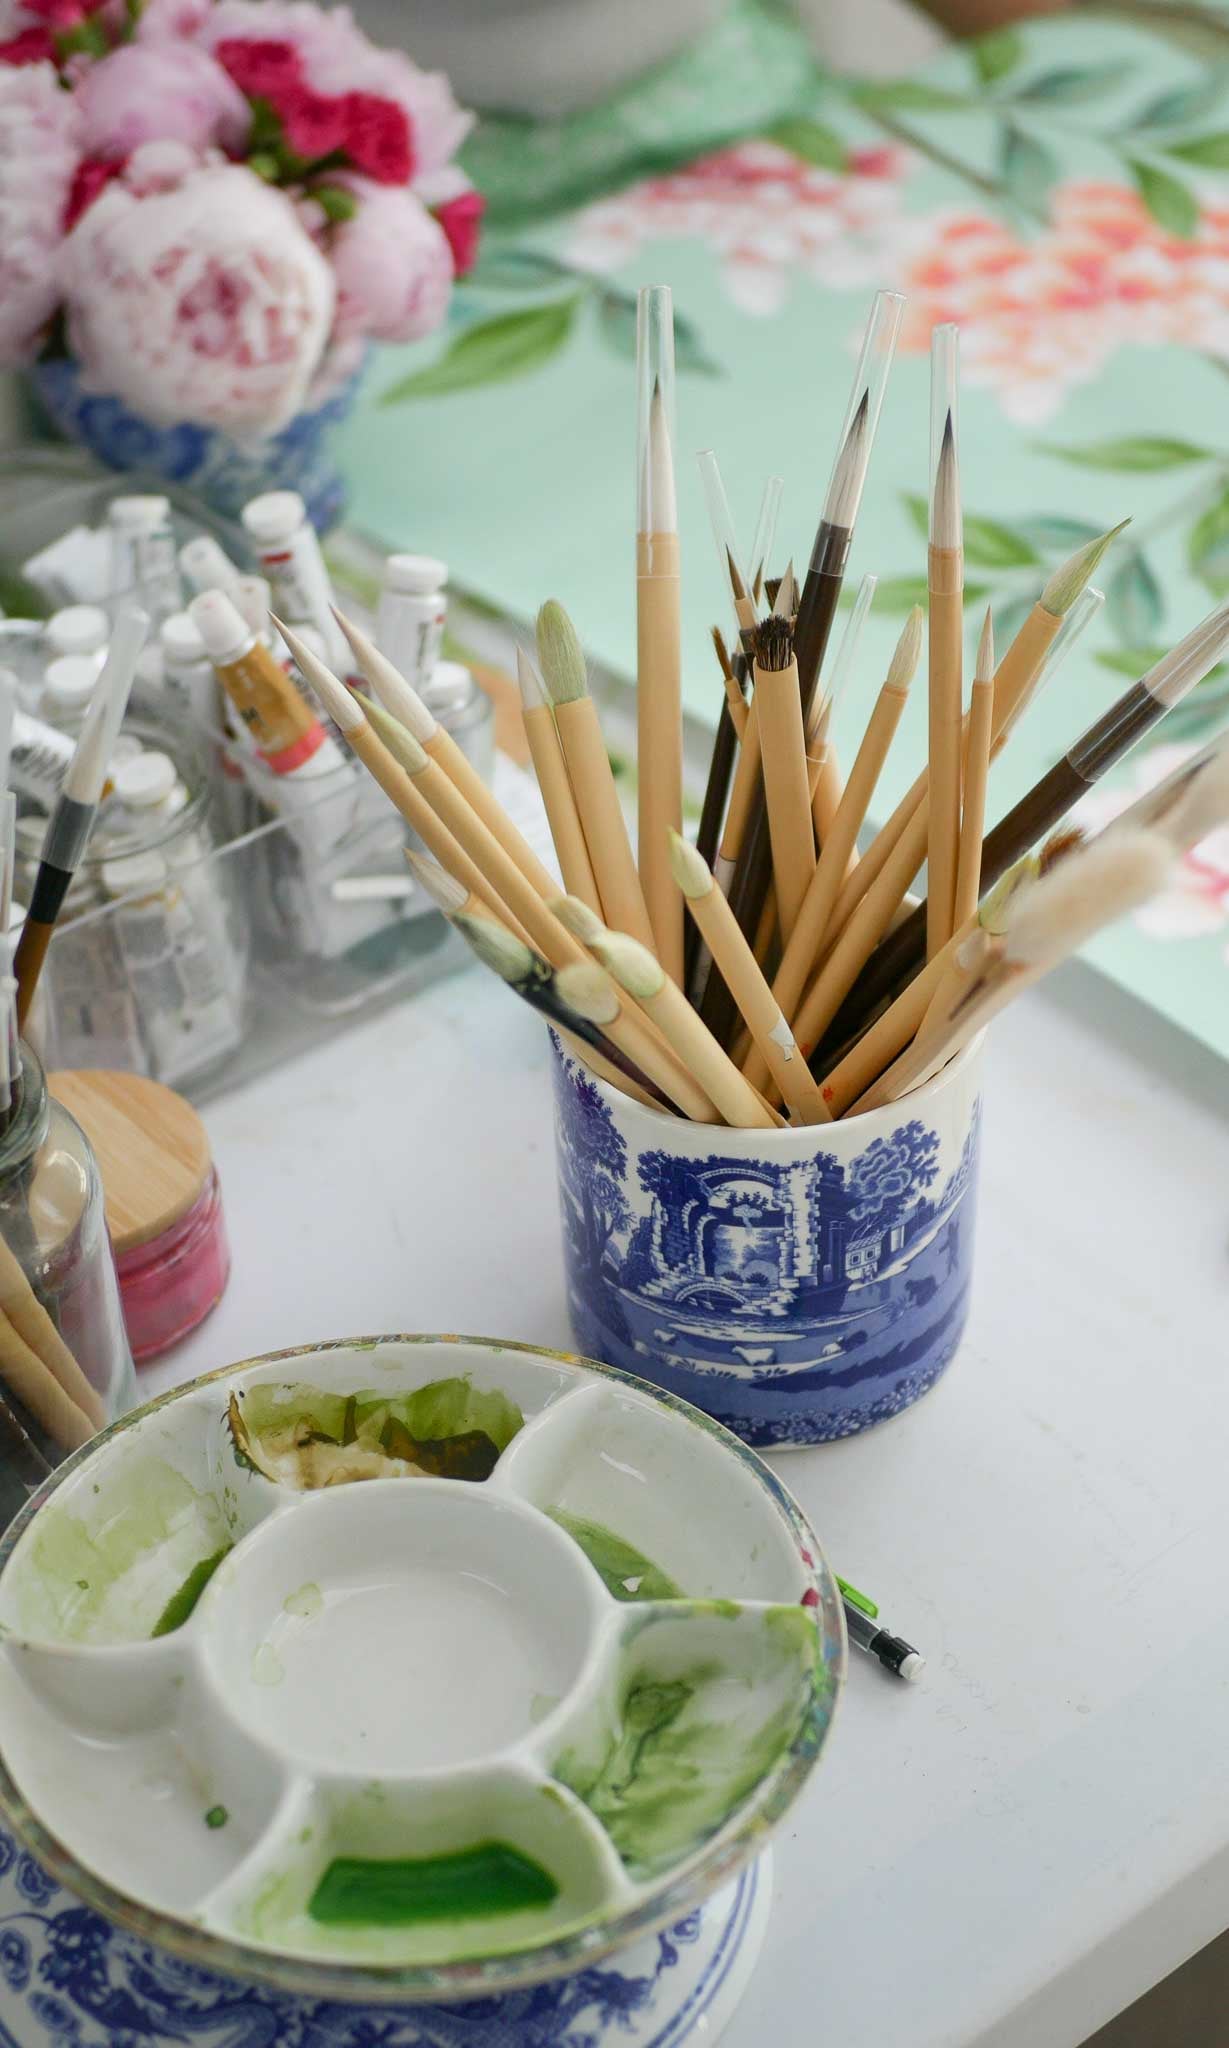 Paintbrushes in a pot next to a paint palette containing green paint